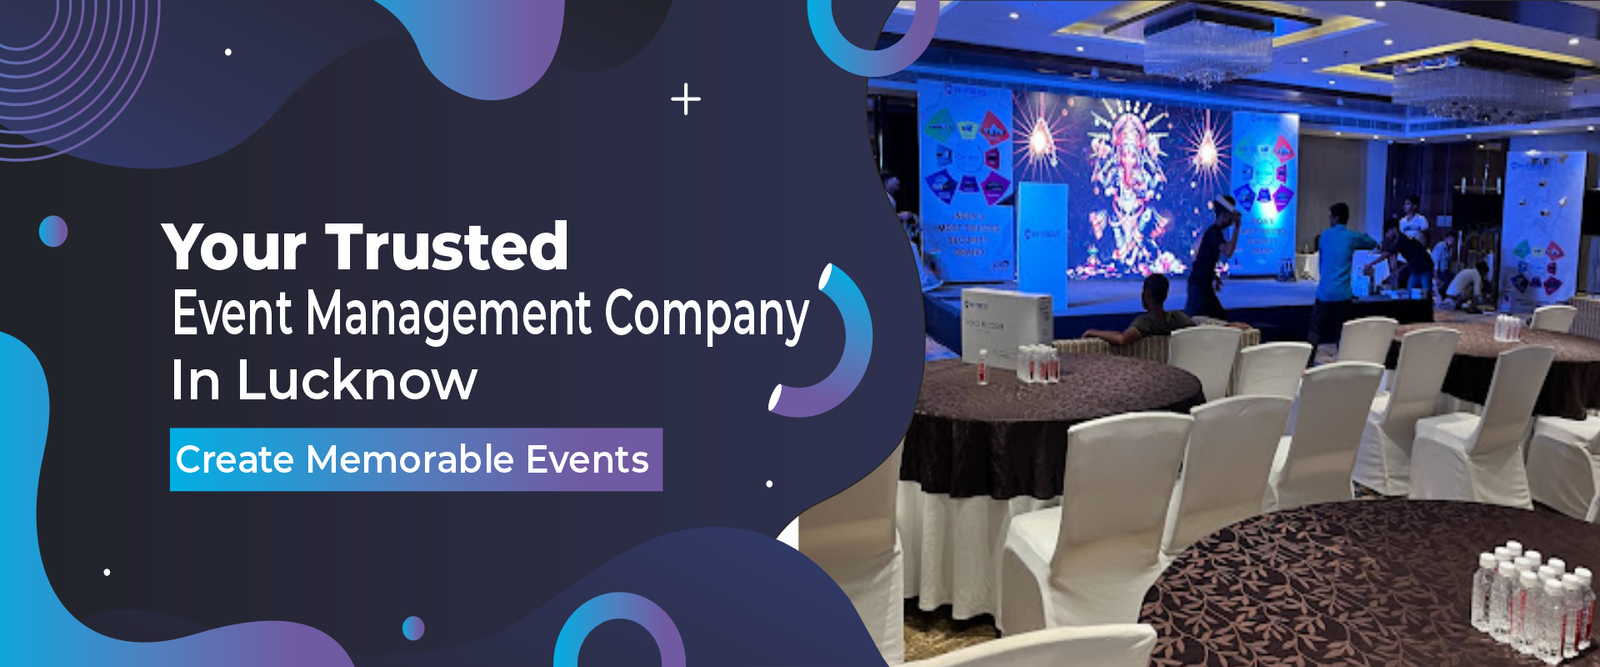 Best Event Management Company in Lucknow